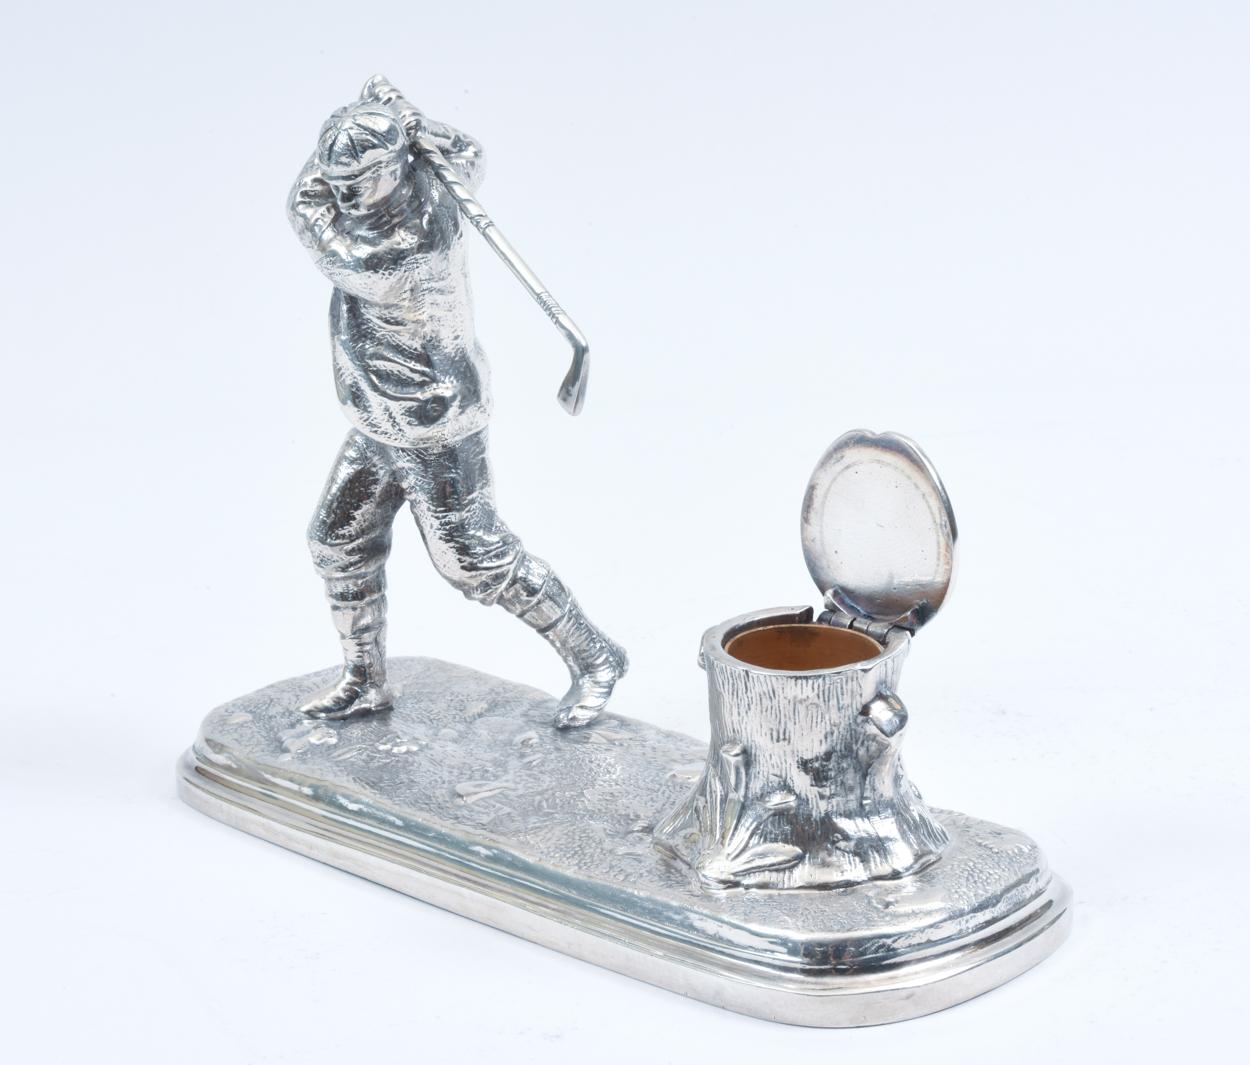 English Sheffield Silver Plated Inkwell with Golfer Design Details 4